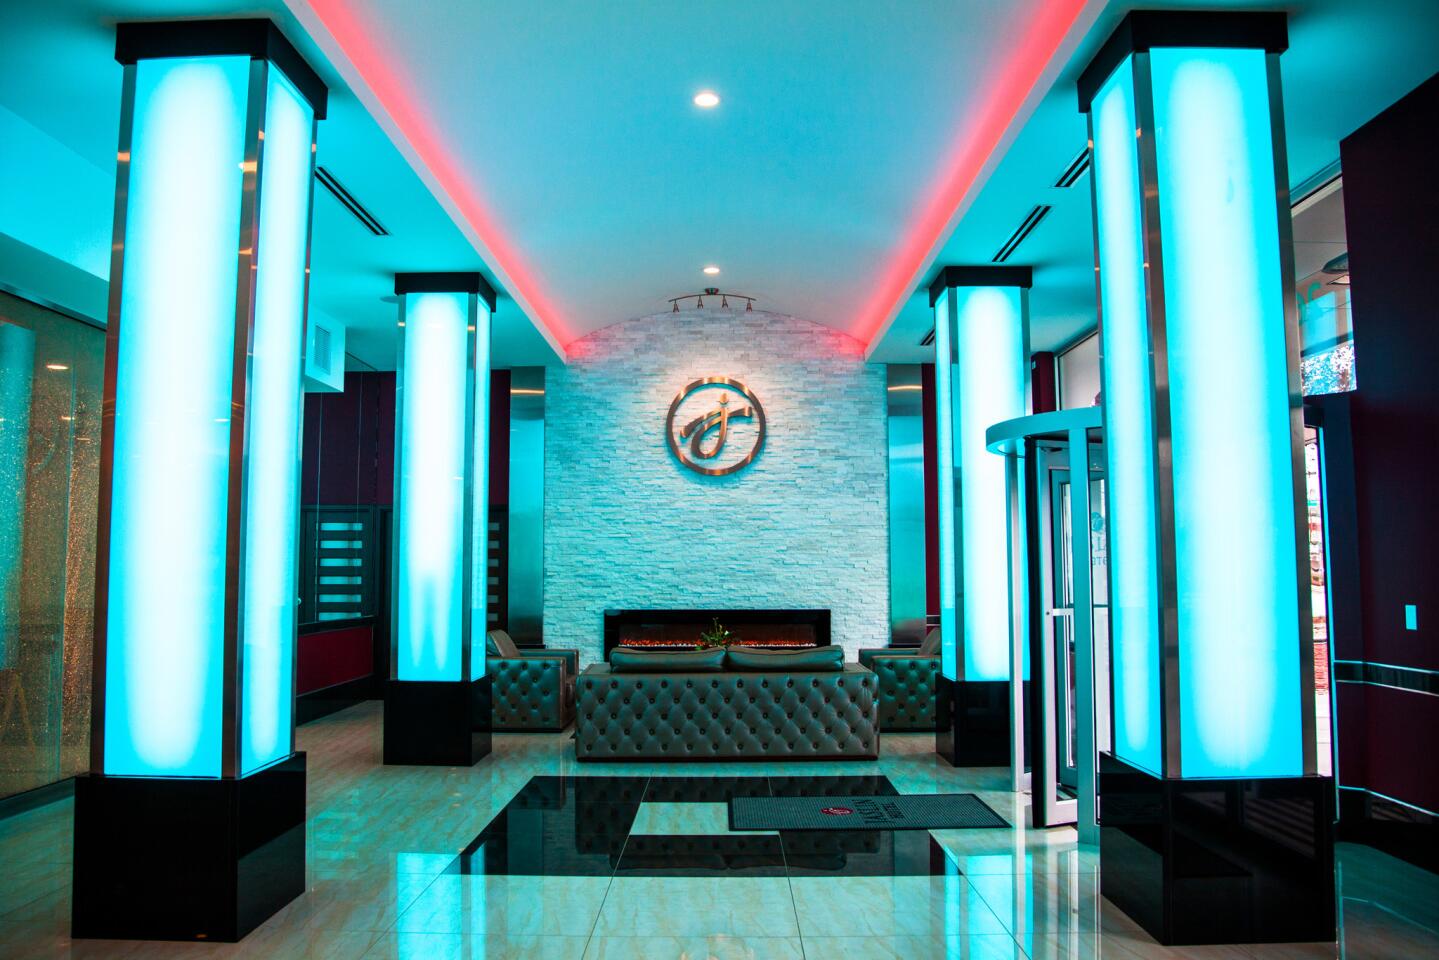 Feeling blue? Or pink or yellow? The Jaslin Hotel lobby is illuminated with color-changing lights.